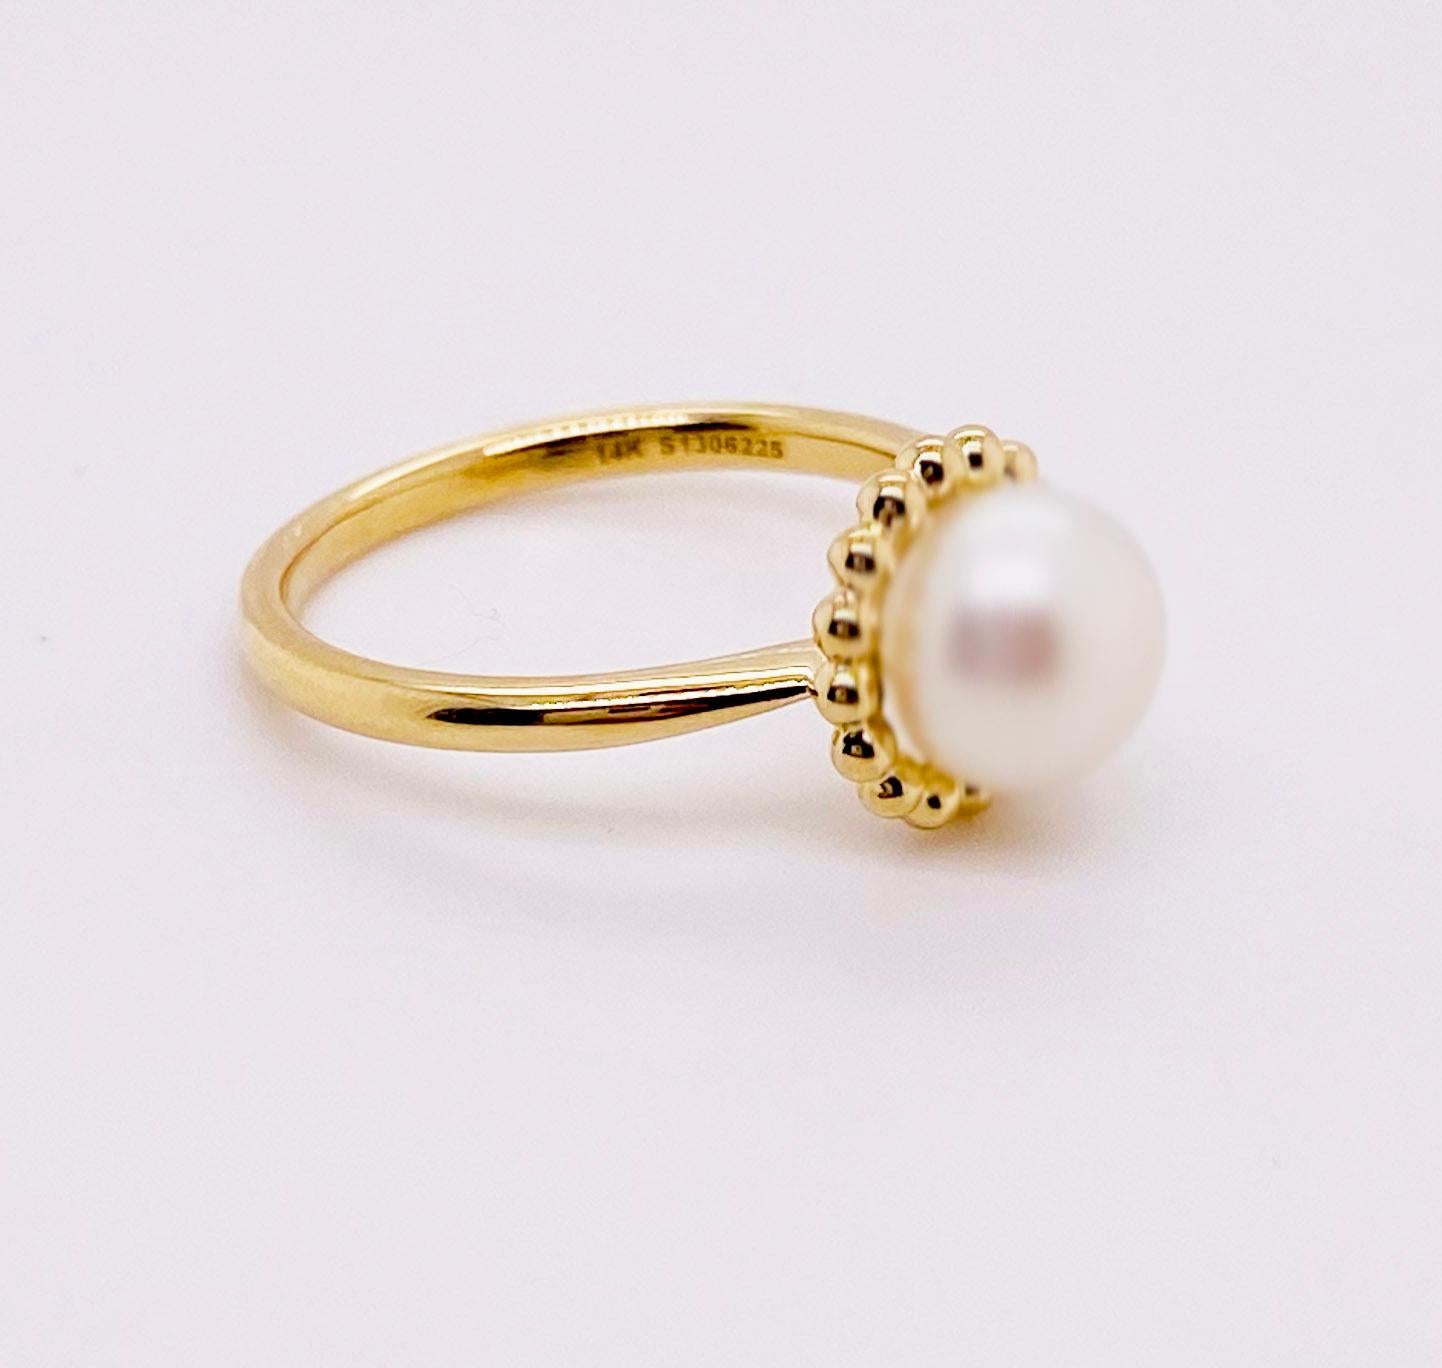 This lovely cultured pearl ring is the perfect gift for a loved one or a great self purchase.  The nice size pearl has a gold beading design that is very simple but elegant.  The pearl is the most desirable color with a nice white color with rose